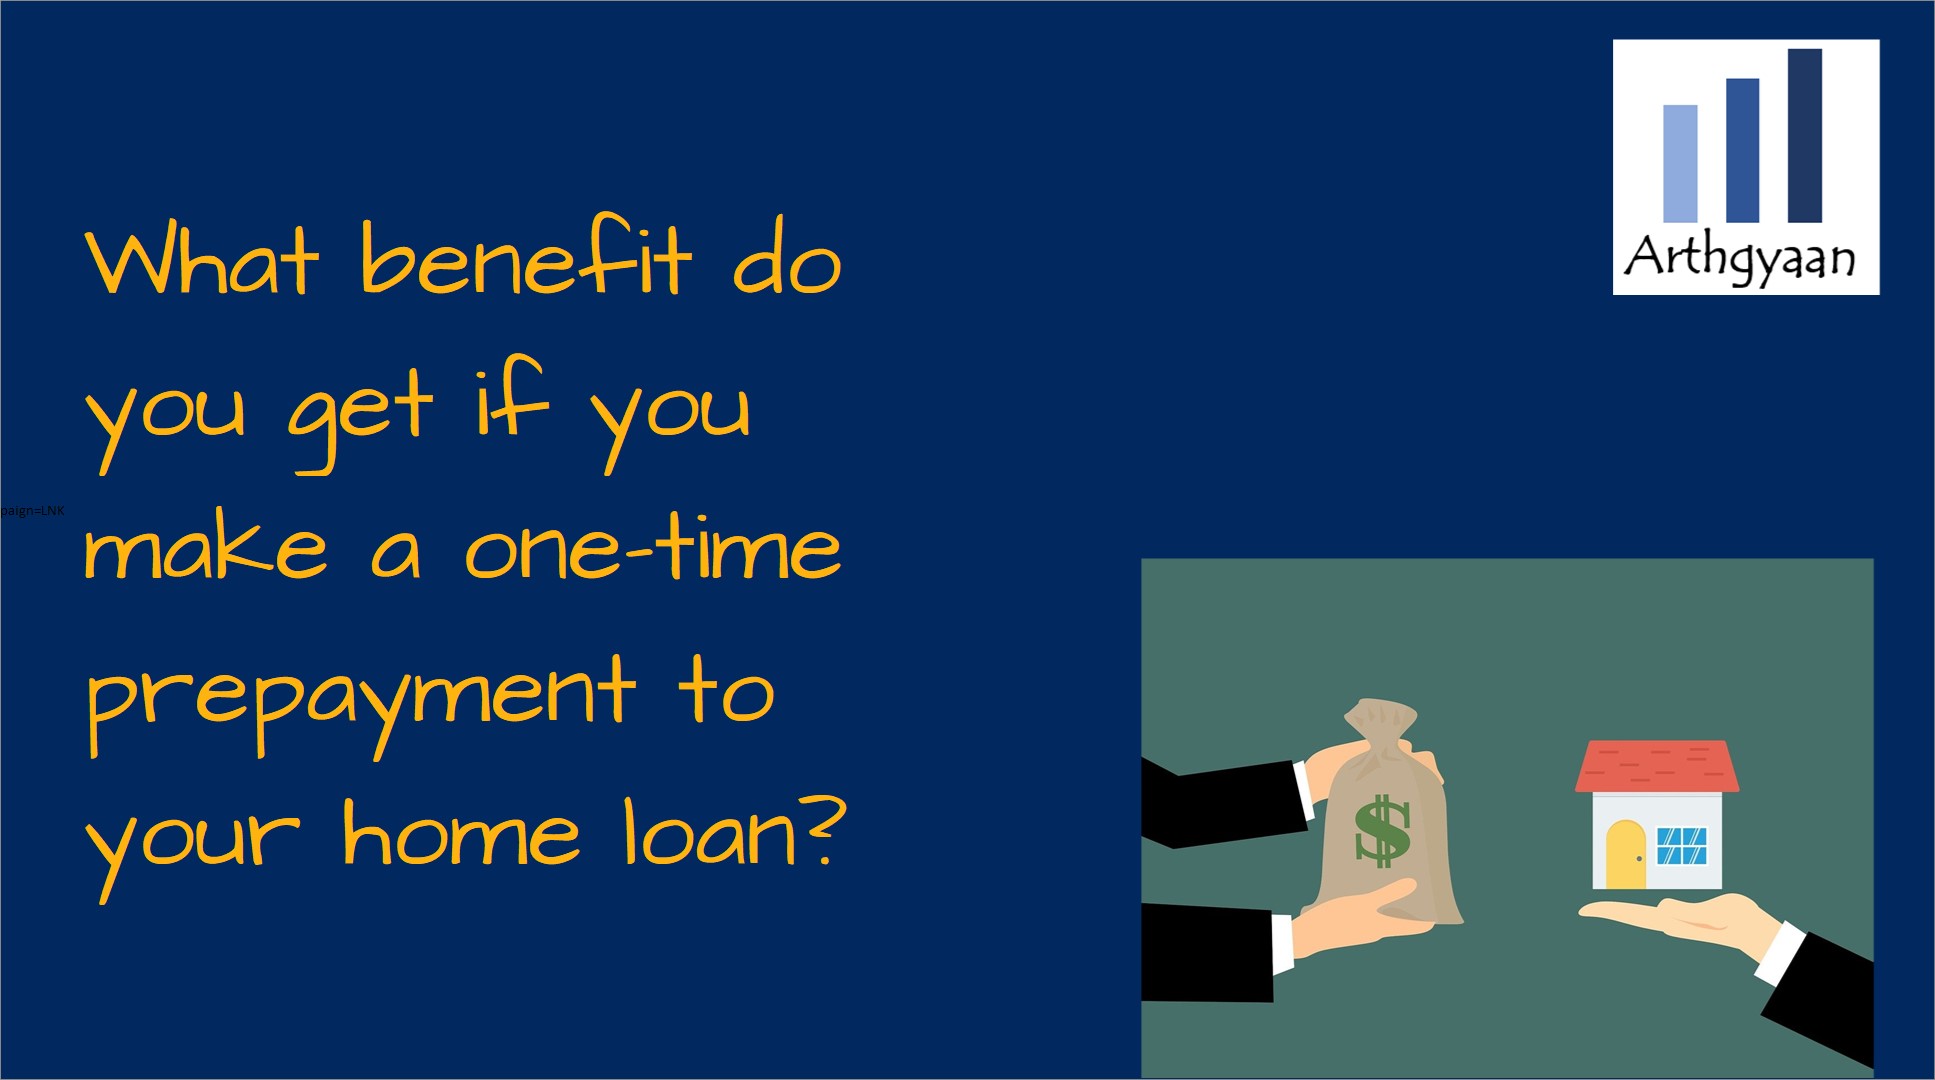 What benefit do you get if you make a one-time prepayment to your home loan?